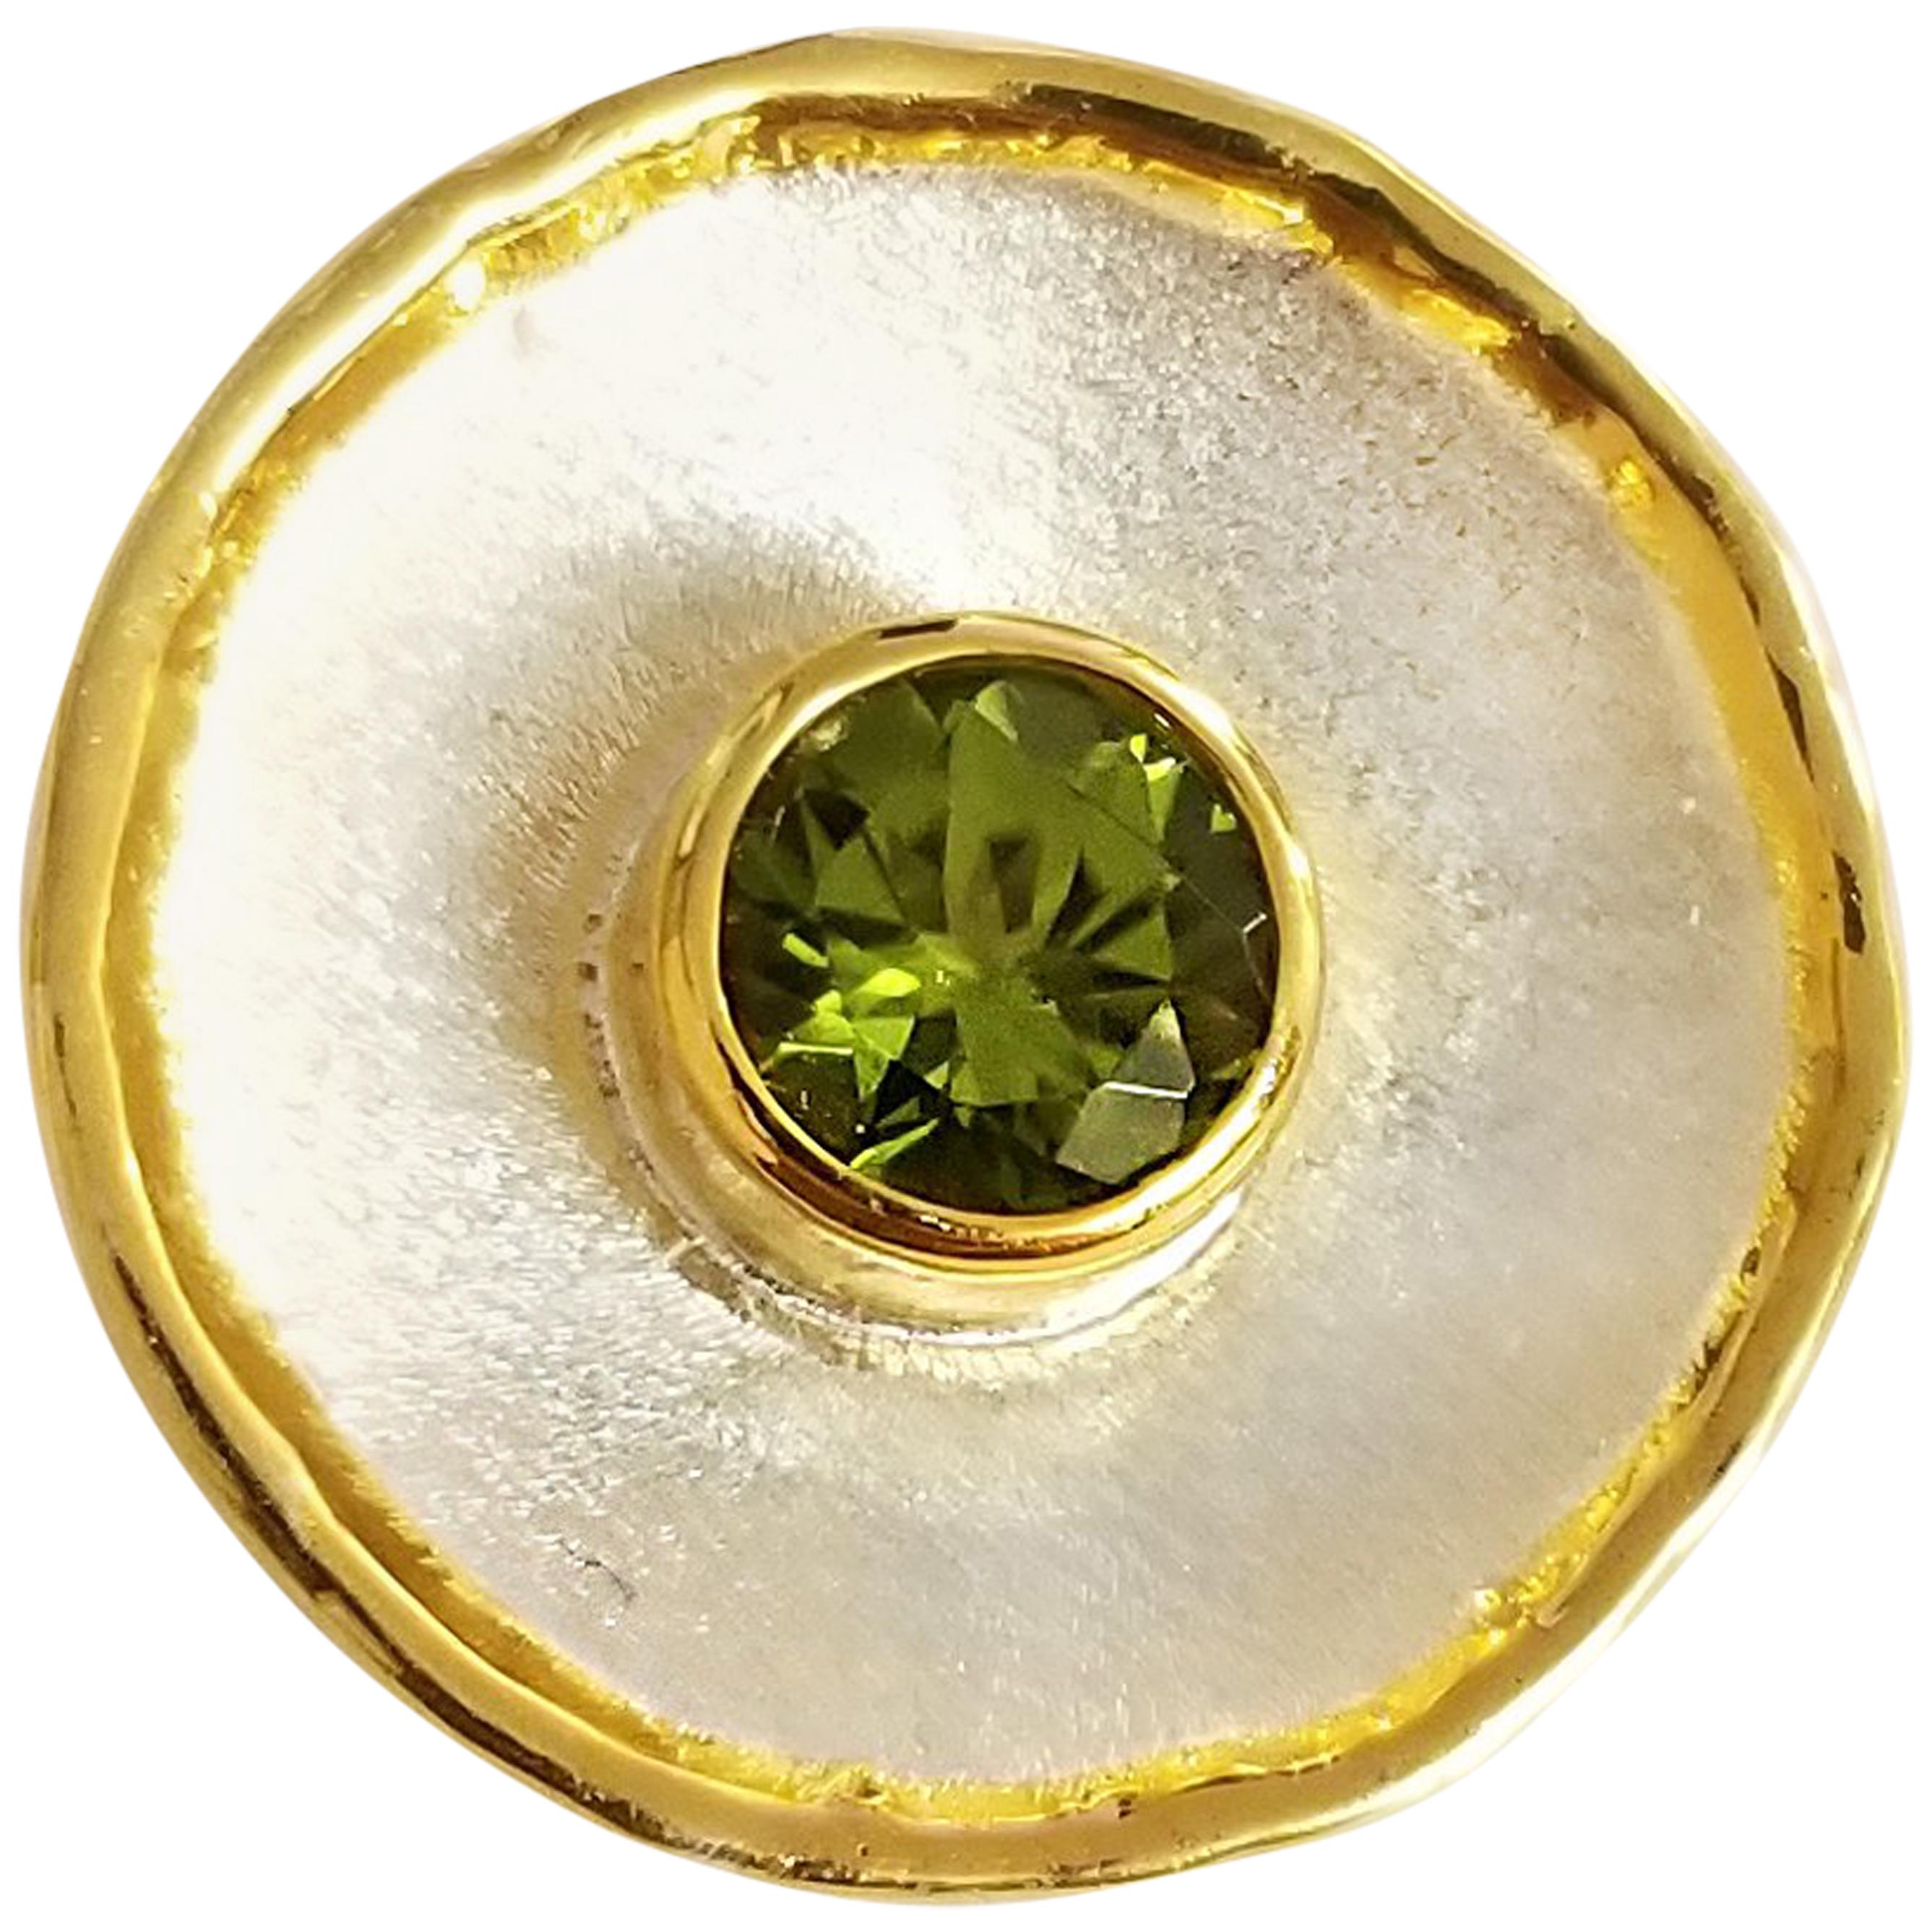 Yianni Creations Midas Collection 100% Handmade Artisan Pendant from Fine Silver with a layover of 24 Karat Yellow Gold features 2.00 Carat Round Cut Peridot complemented by unique techniques of craftsmanship - brushed texture and nature-inspired